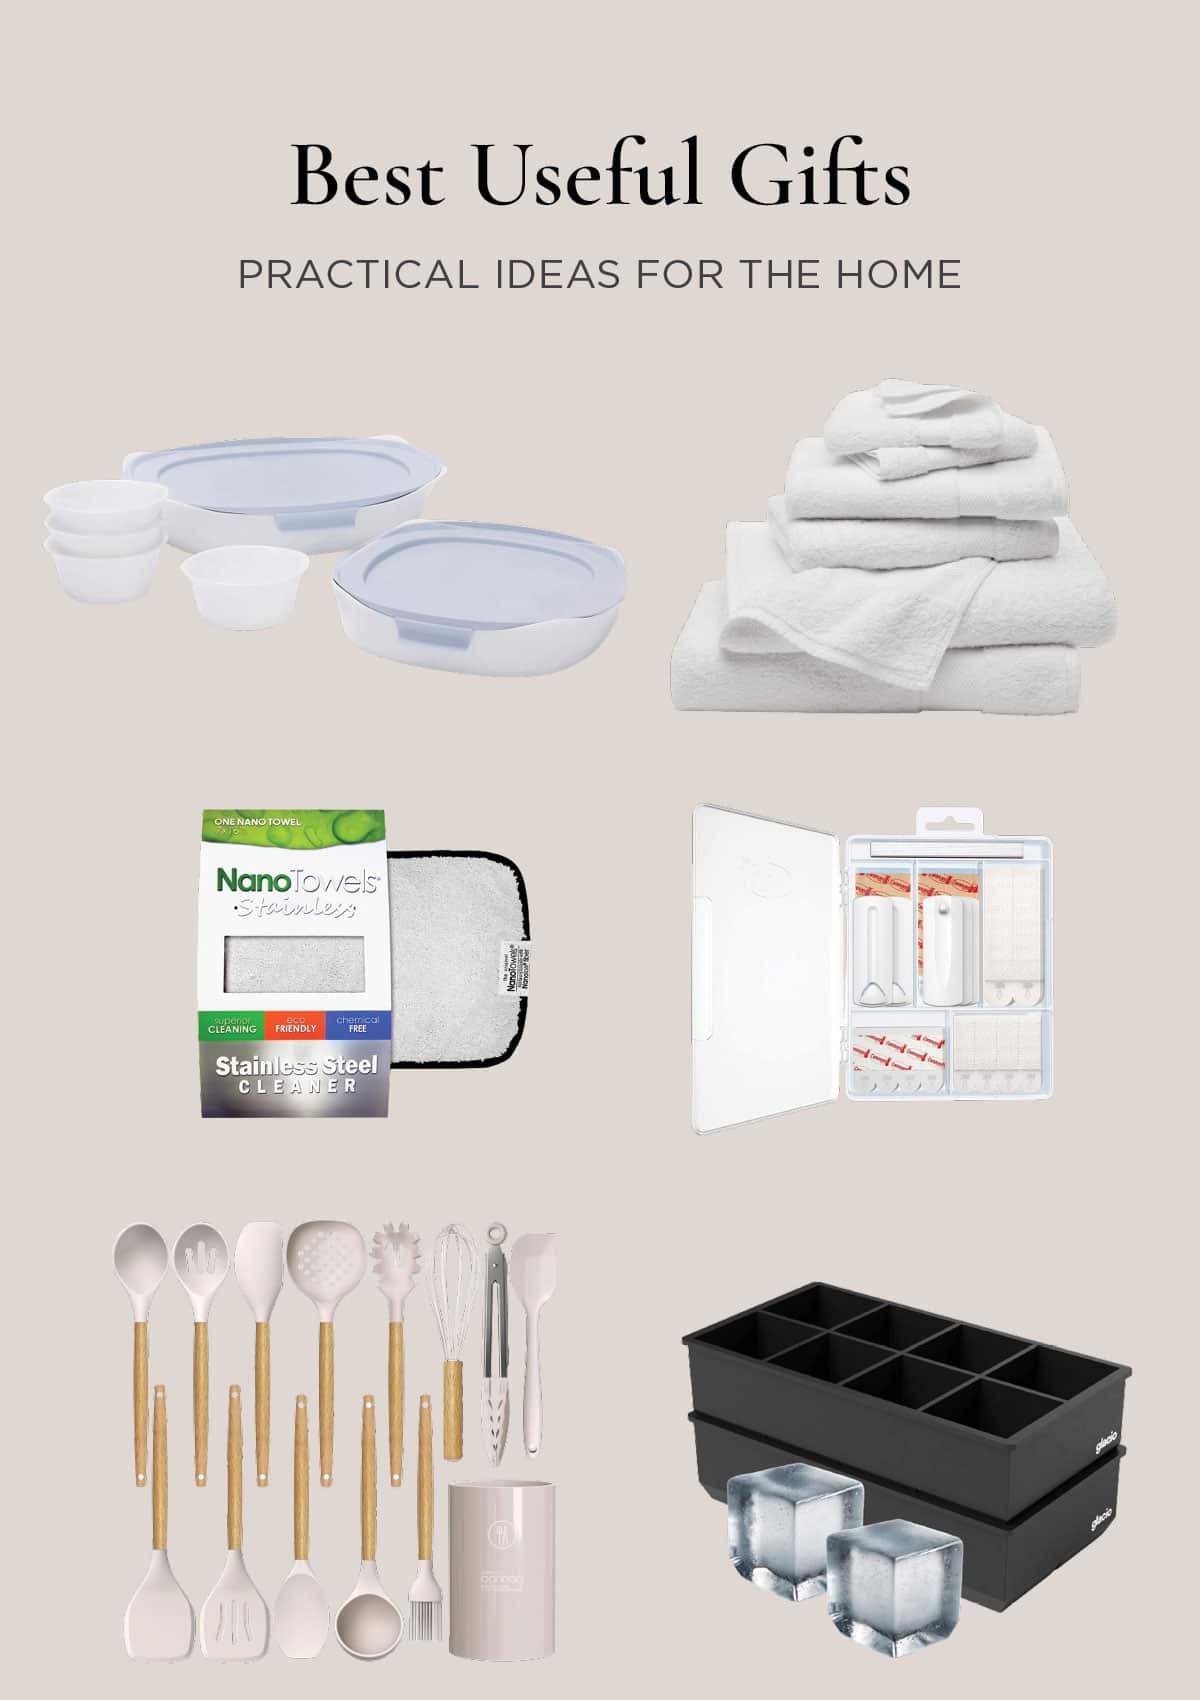 Useful Gift Ideas - The Practical Gift Guide